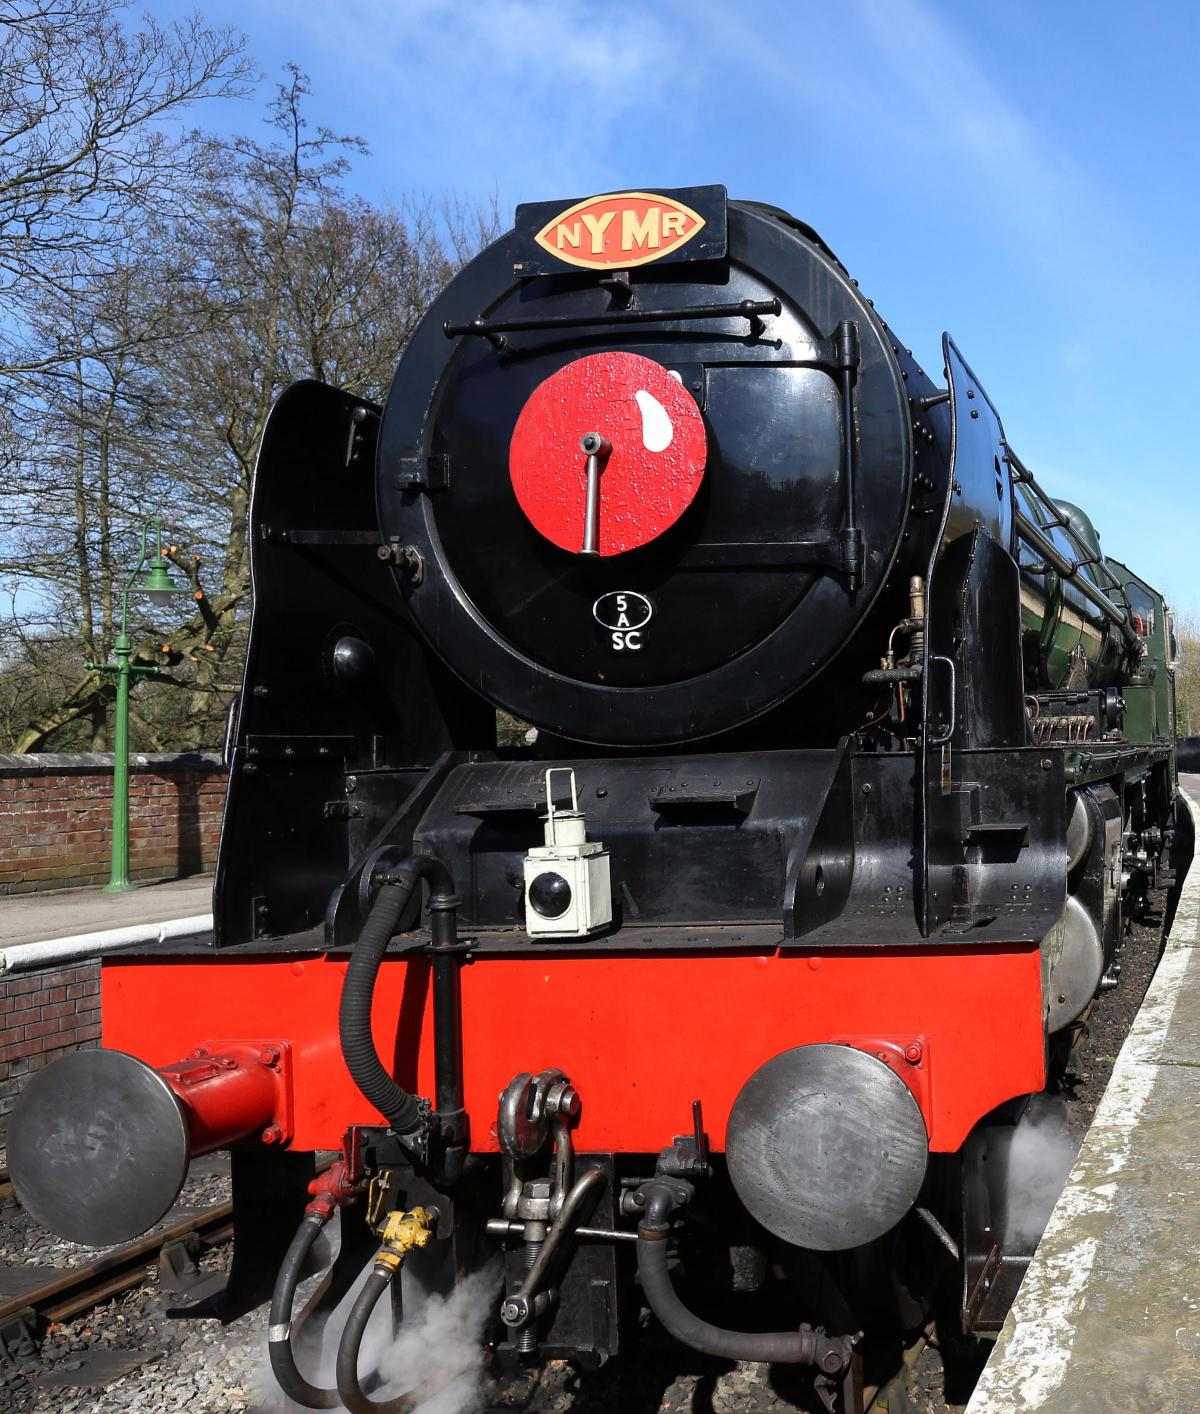 The North Yorkshire Moors Railway celebrates comic relief with a big red nose on Royal Scot!